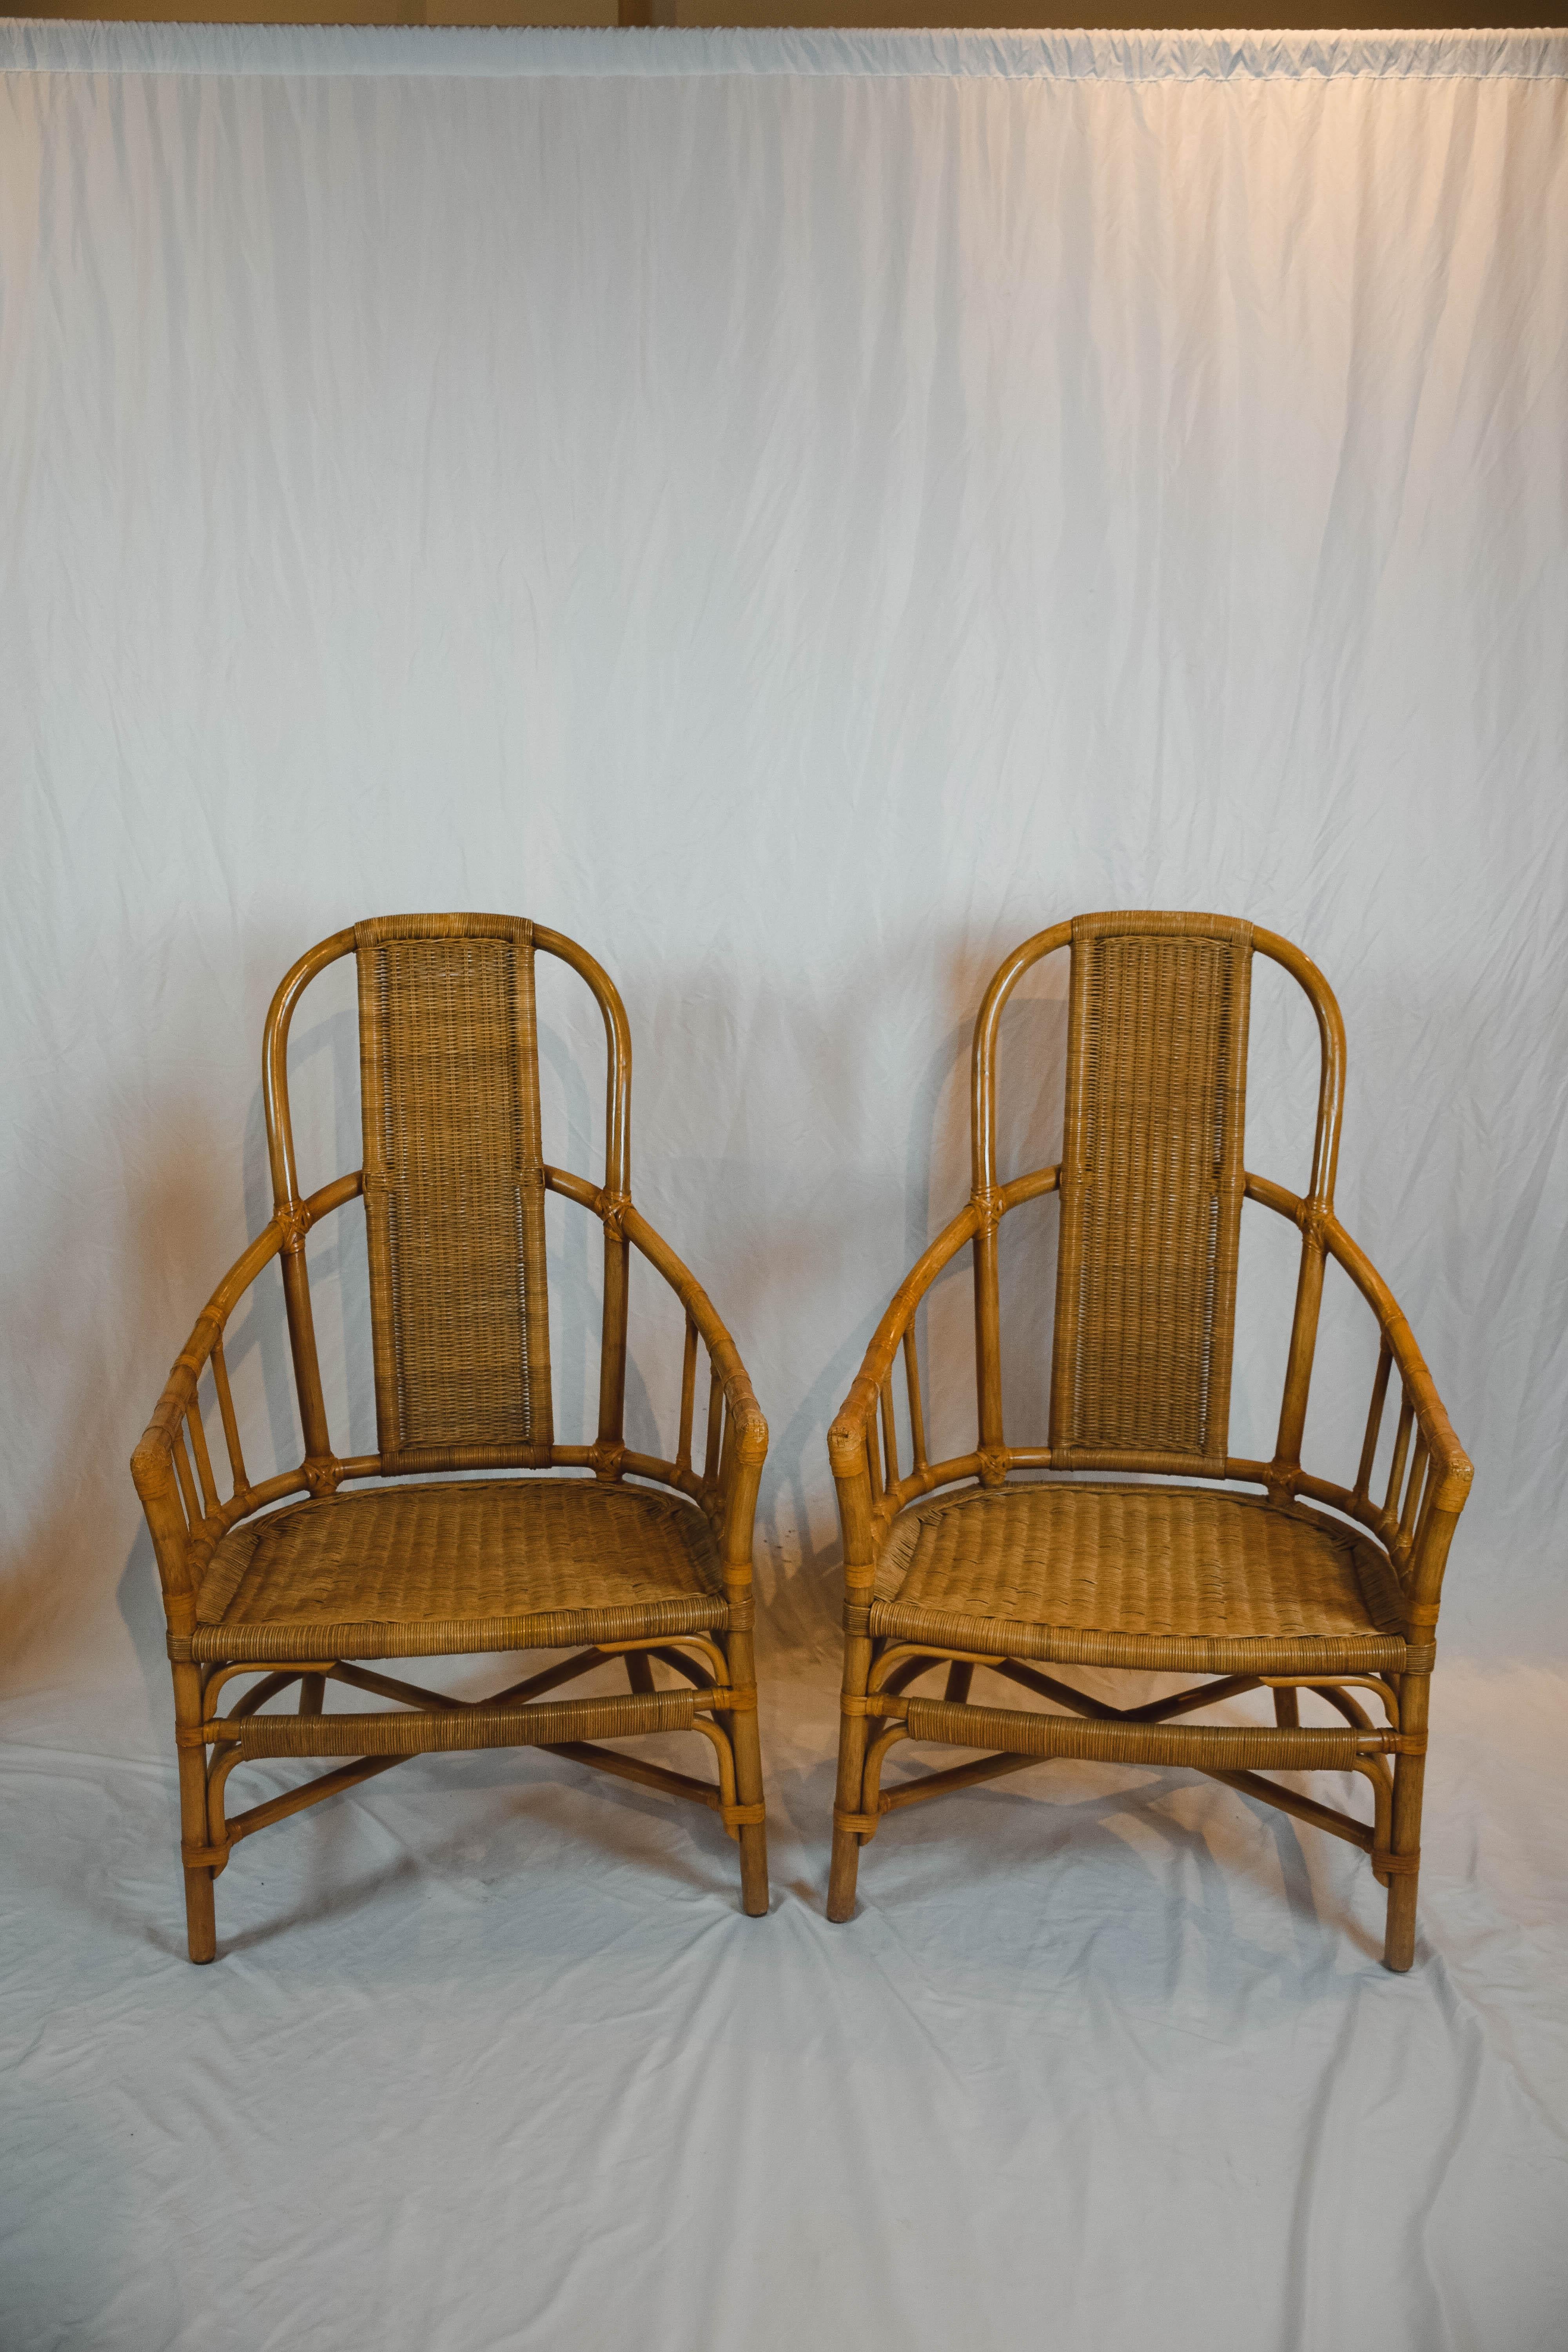 Pair of wonderful vintage rattan bentwood chairs in excellent condition. These comfortable barrel back chairs would be a great addition to your loggia or would be beautiful indoors as well. 

 